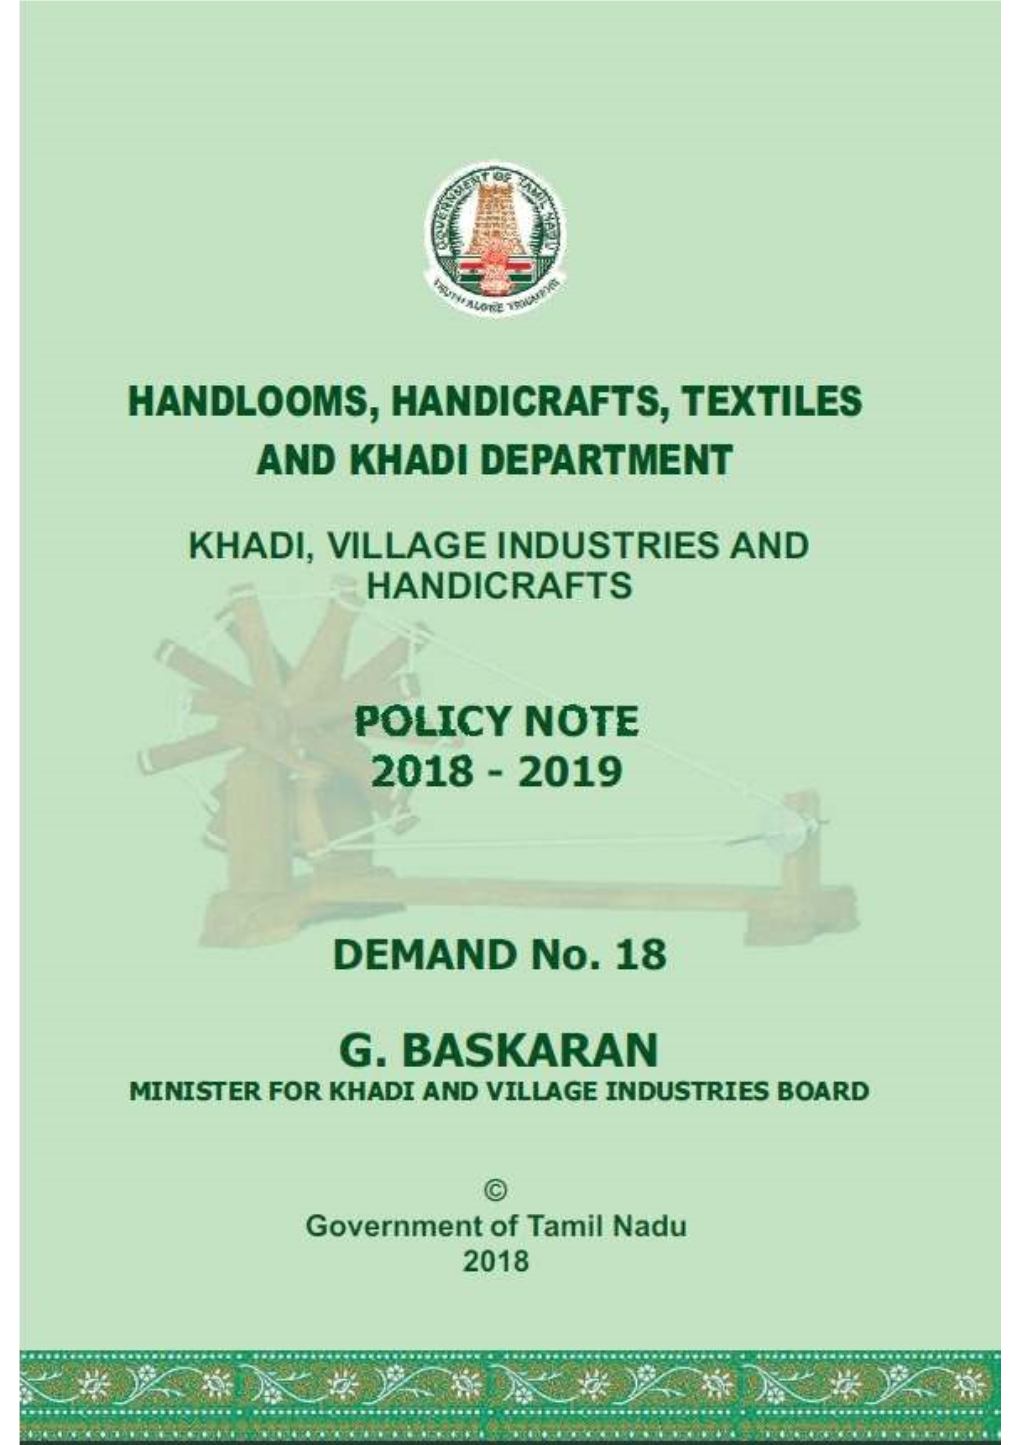 Policy Note 2018- 2019